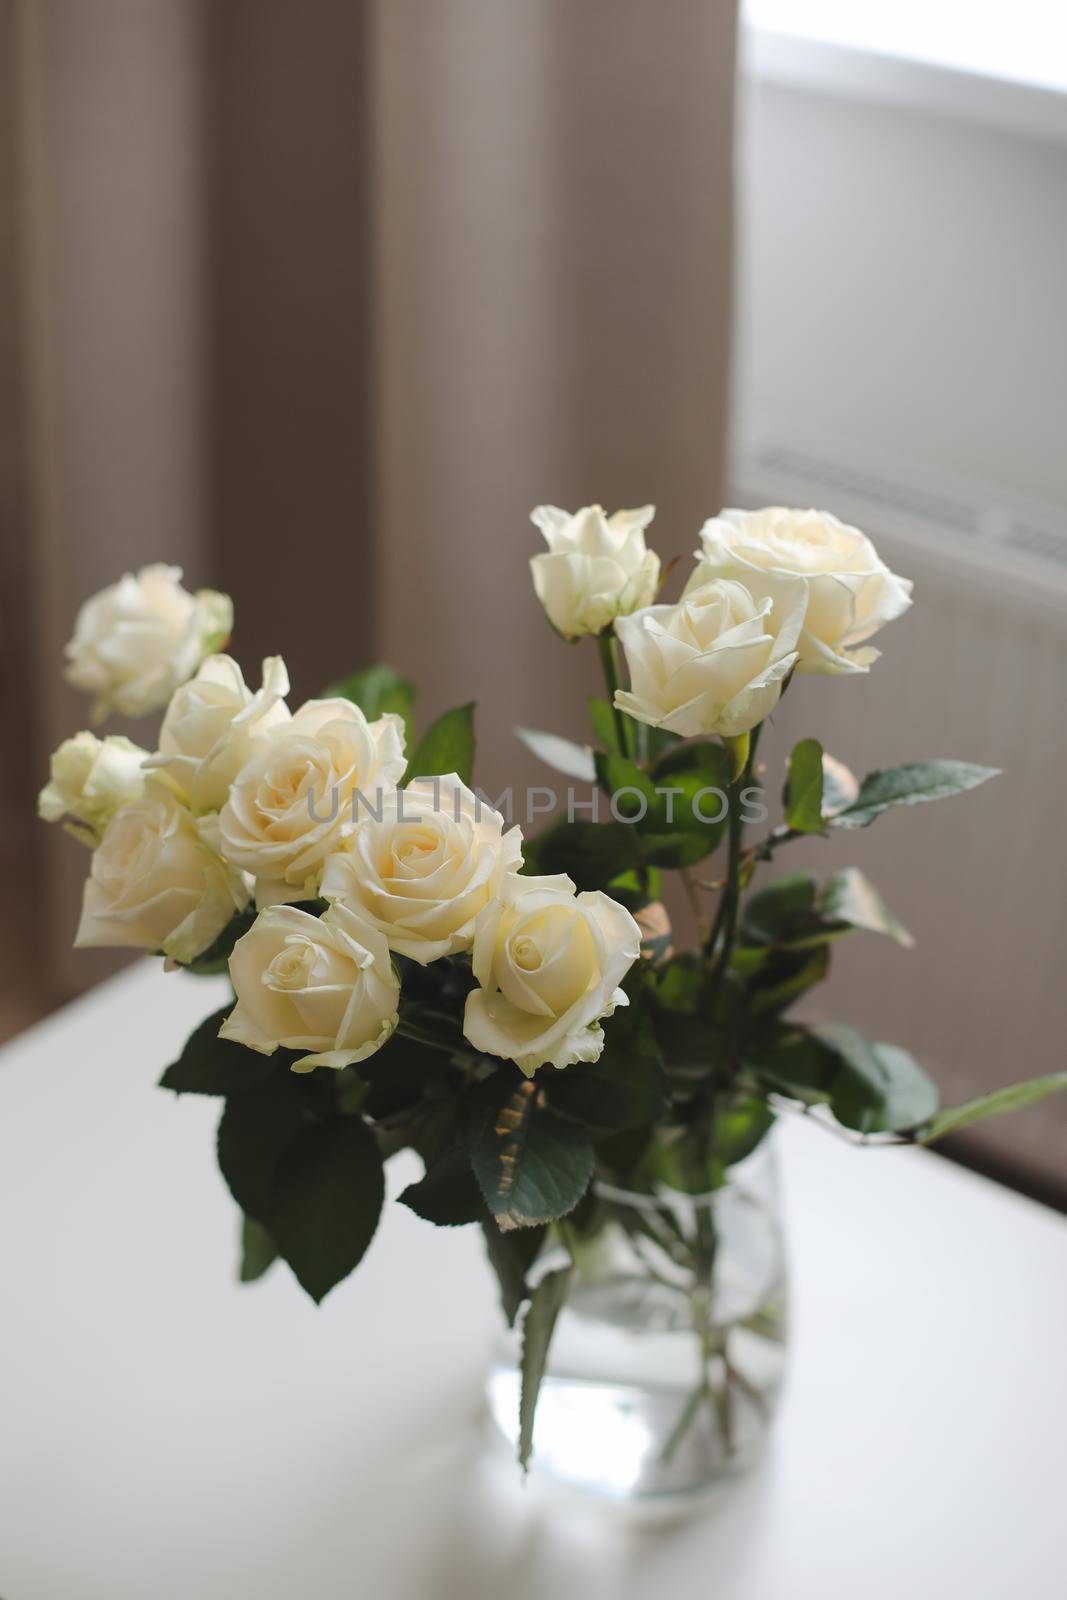 fresh rose bouquet. Selective focus. Blurred background with shadows from curtains. Floral spring background. High quality photo